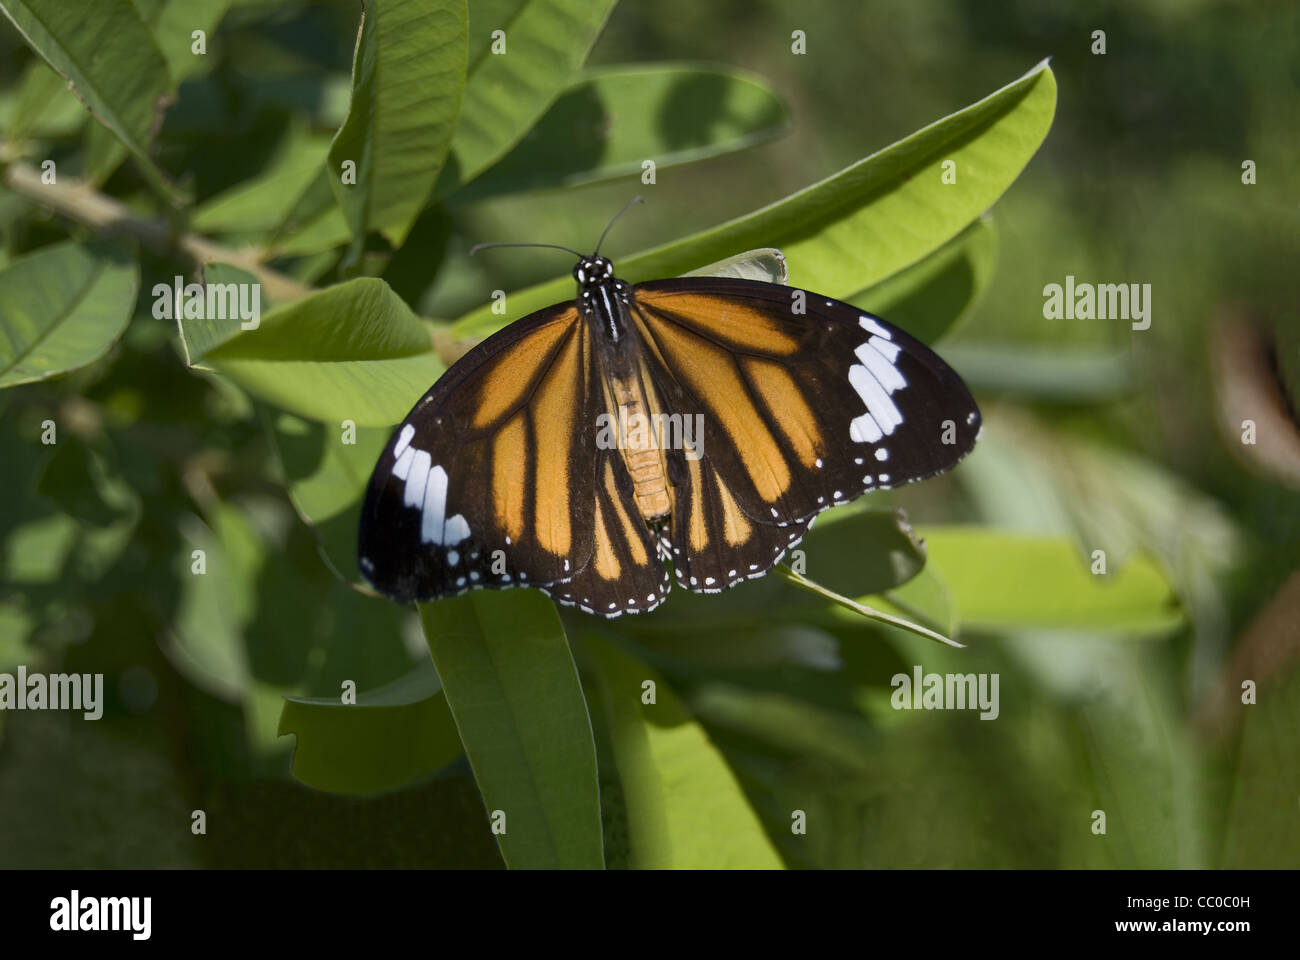 Plain Tiger (Danaus chrysippus) butterfly. Nymphalidae : Brush Footed Butterflies Stock Photo